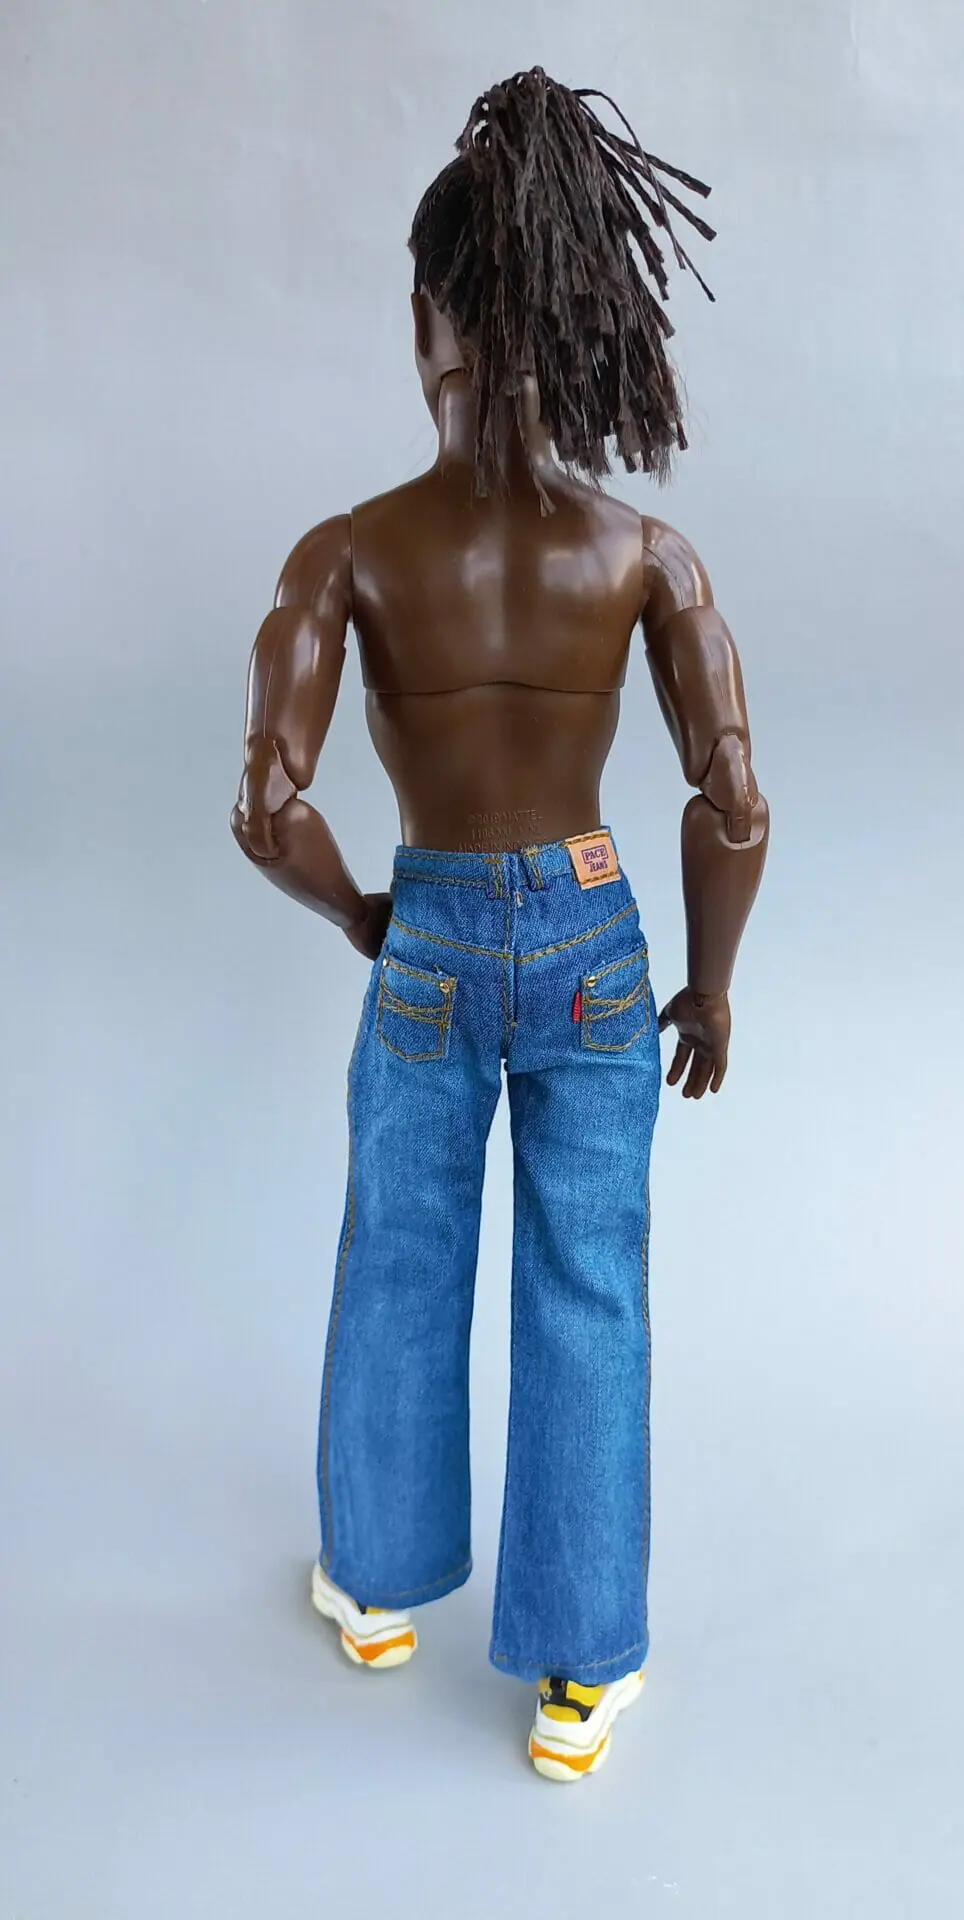 Clothing Ken doll realistic 1 new style blue jeans